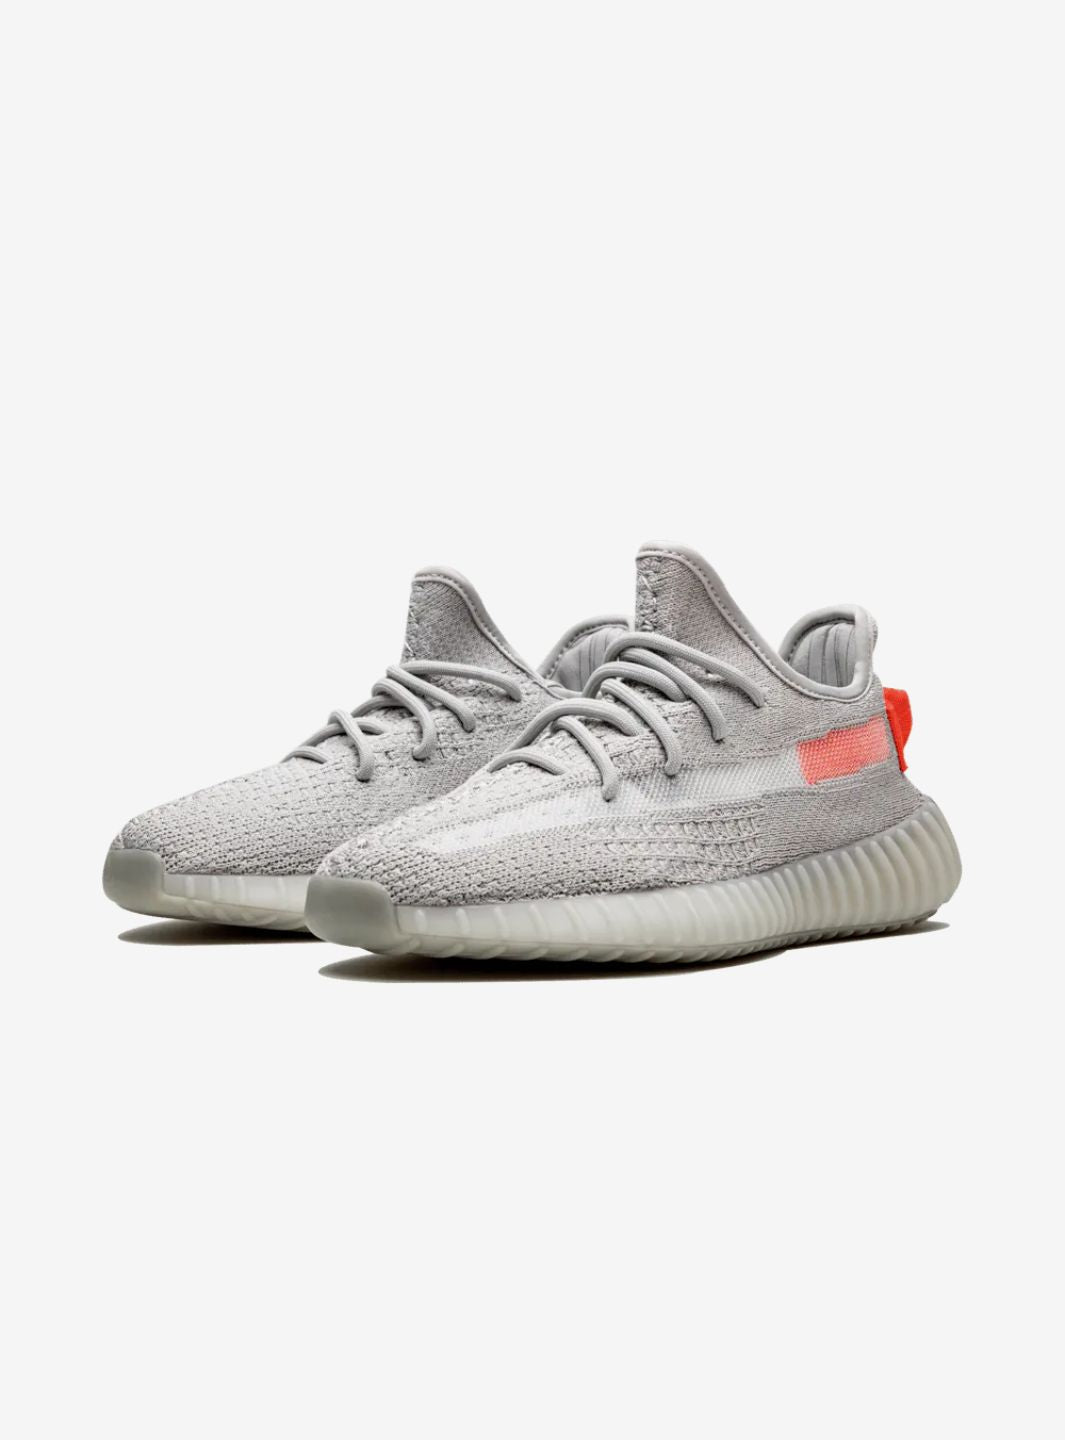 Adidas Yeezy Boost 350 V2 Tail Light - FX9017 | ResellZone